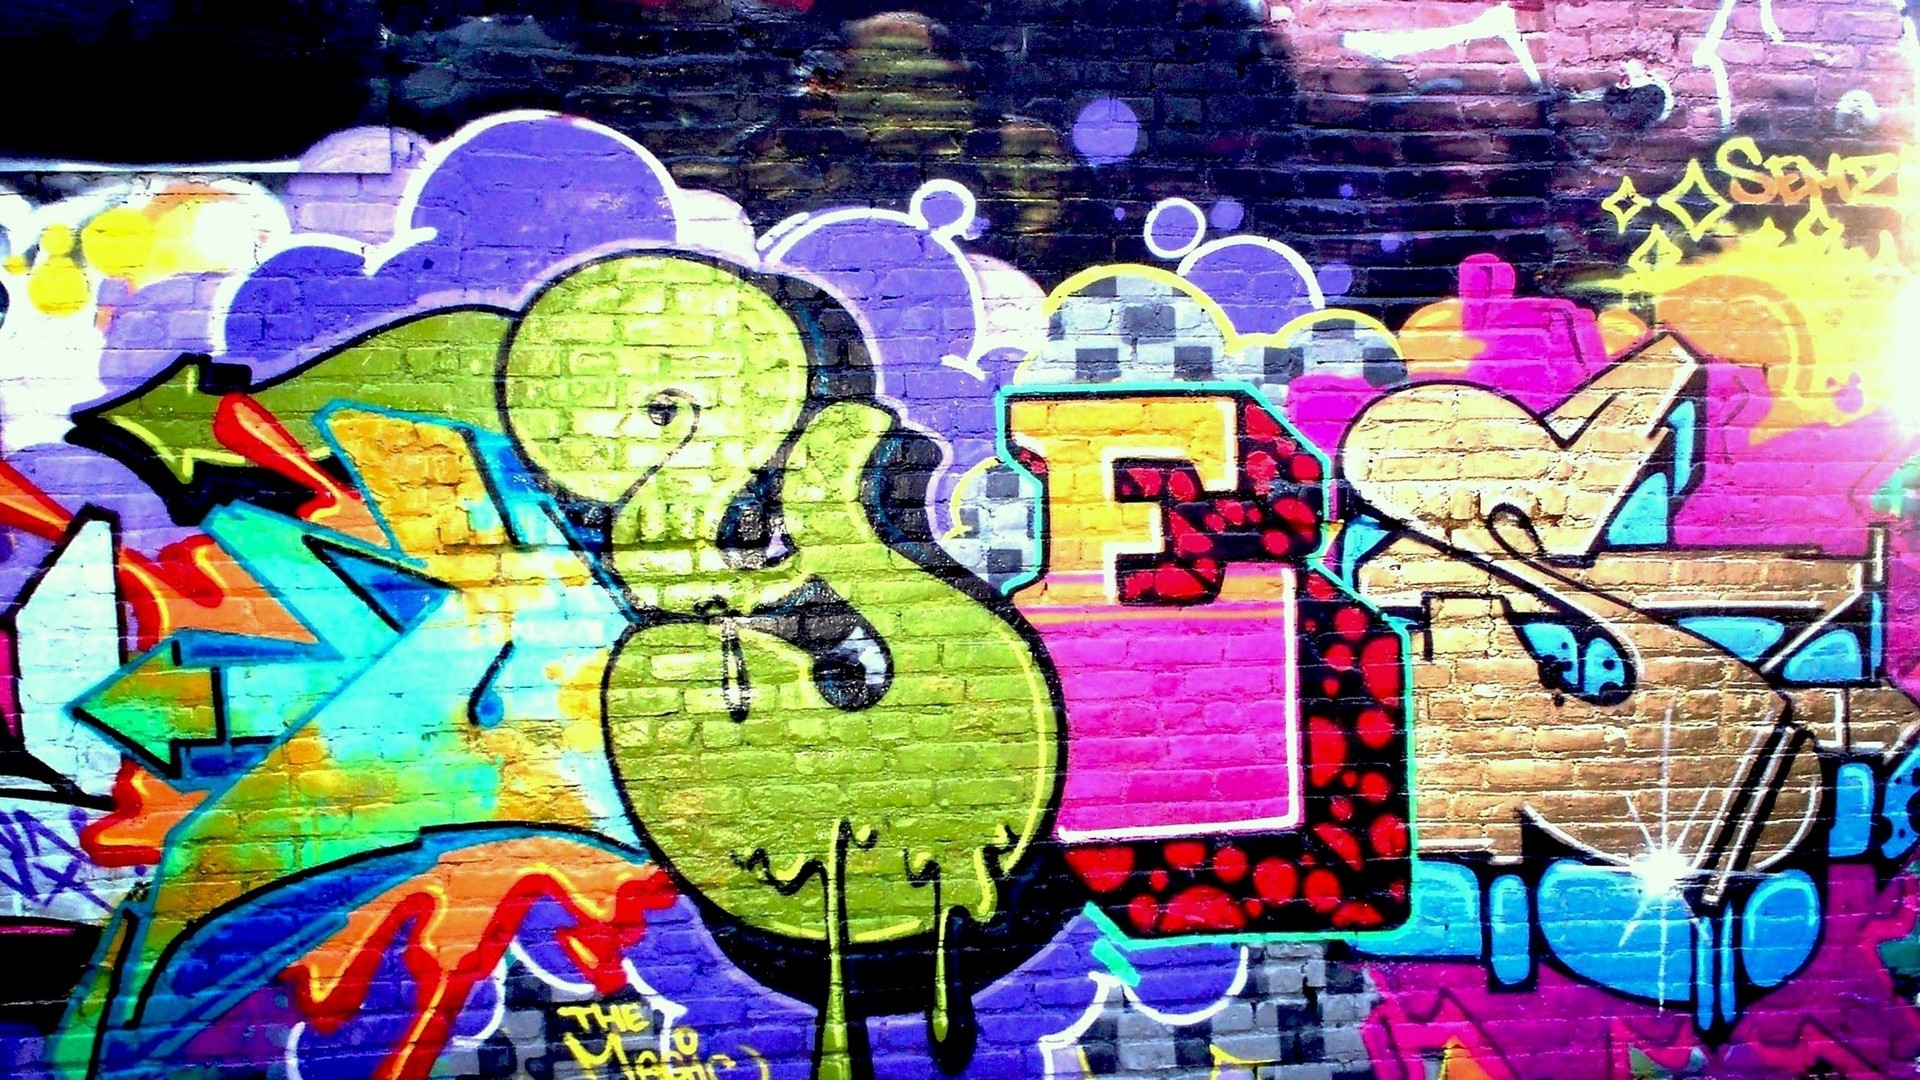 Graffiti Wall Wallpaper For Desktop with image resolution 1920x1080 pixel. You can use this wallpaper as background for your desktop Computer Screensavers, Android or iPhone smartphones